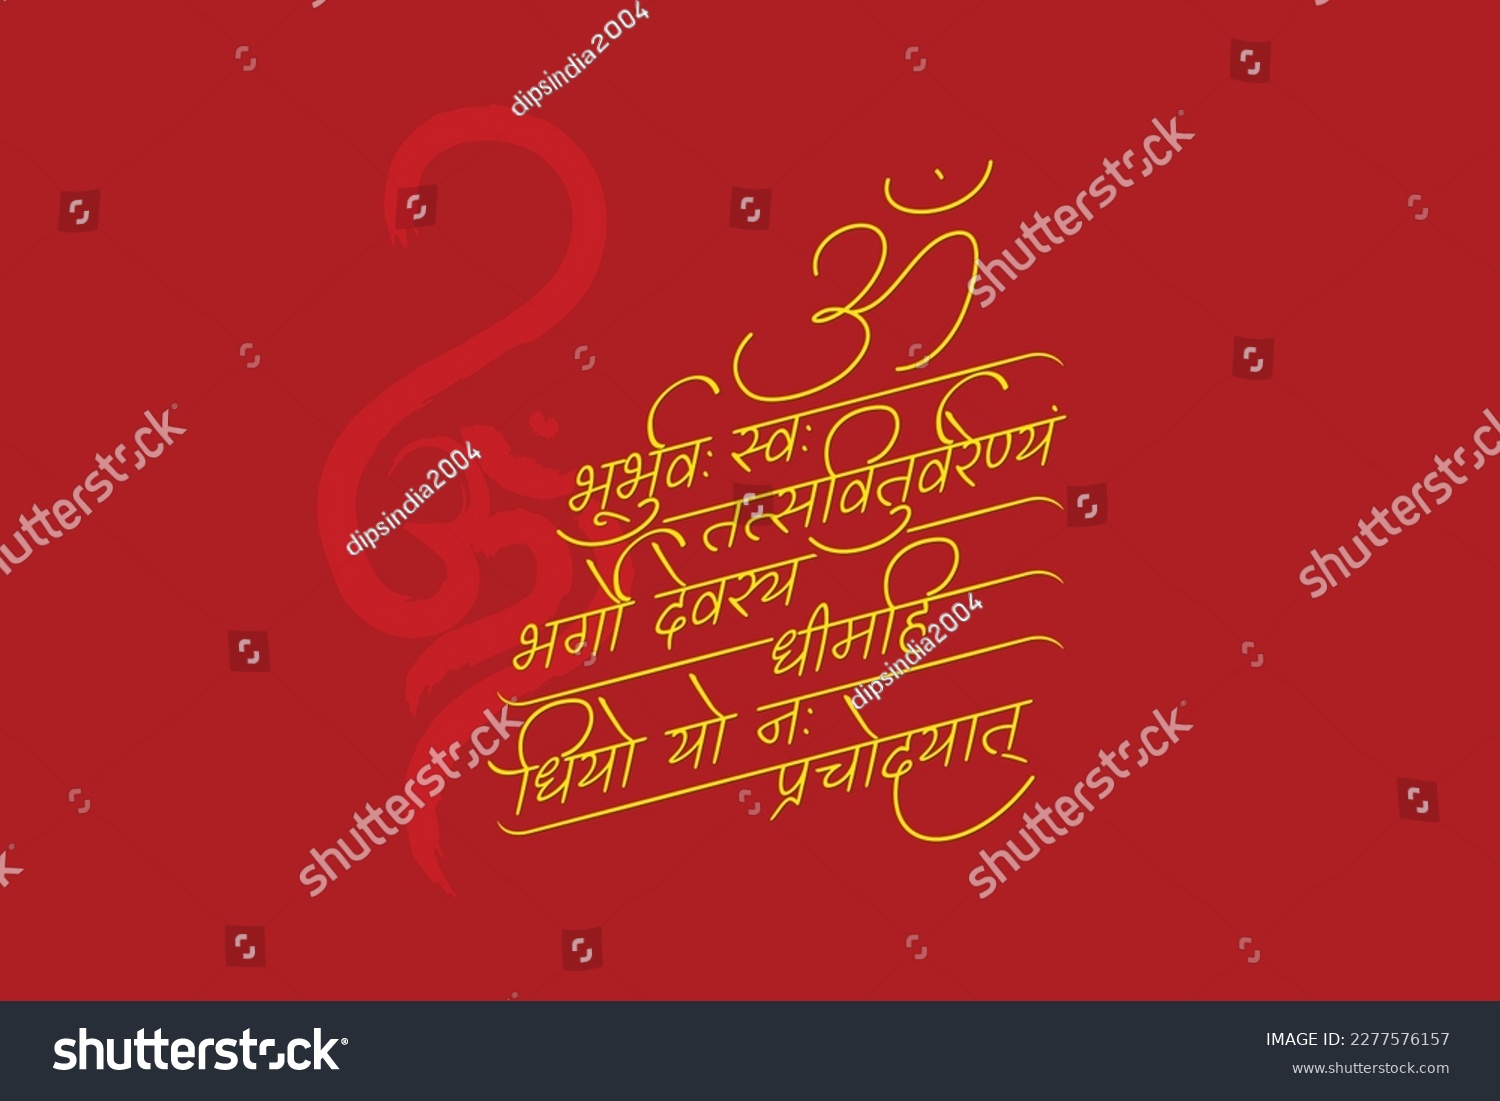 SVG of Calligraphy Om Mantra (Chants) Hindu Mantra (Gayatri Mantra), Lord Gayatri mantra typography in Devanagari letters. Declaration of appreciation, to both the nurturing sun and the  svg